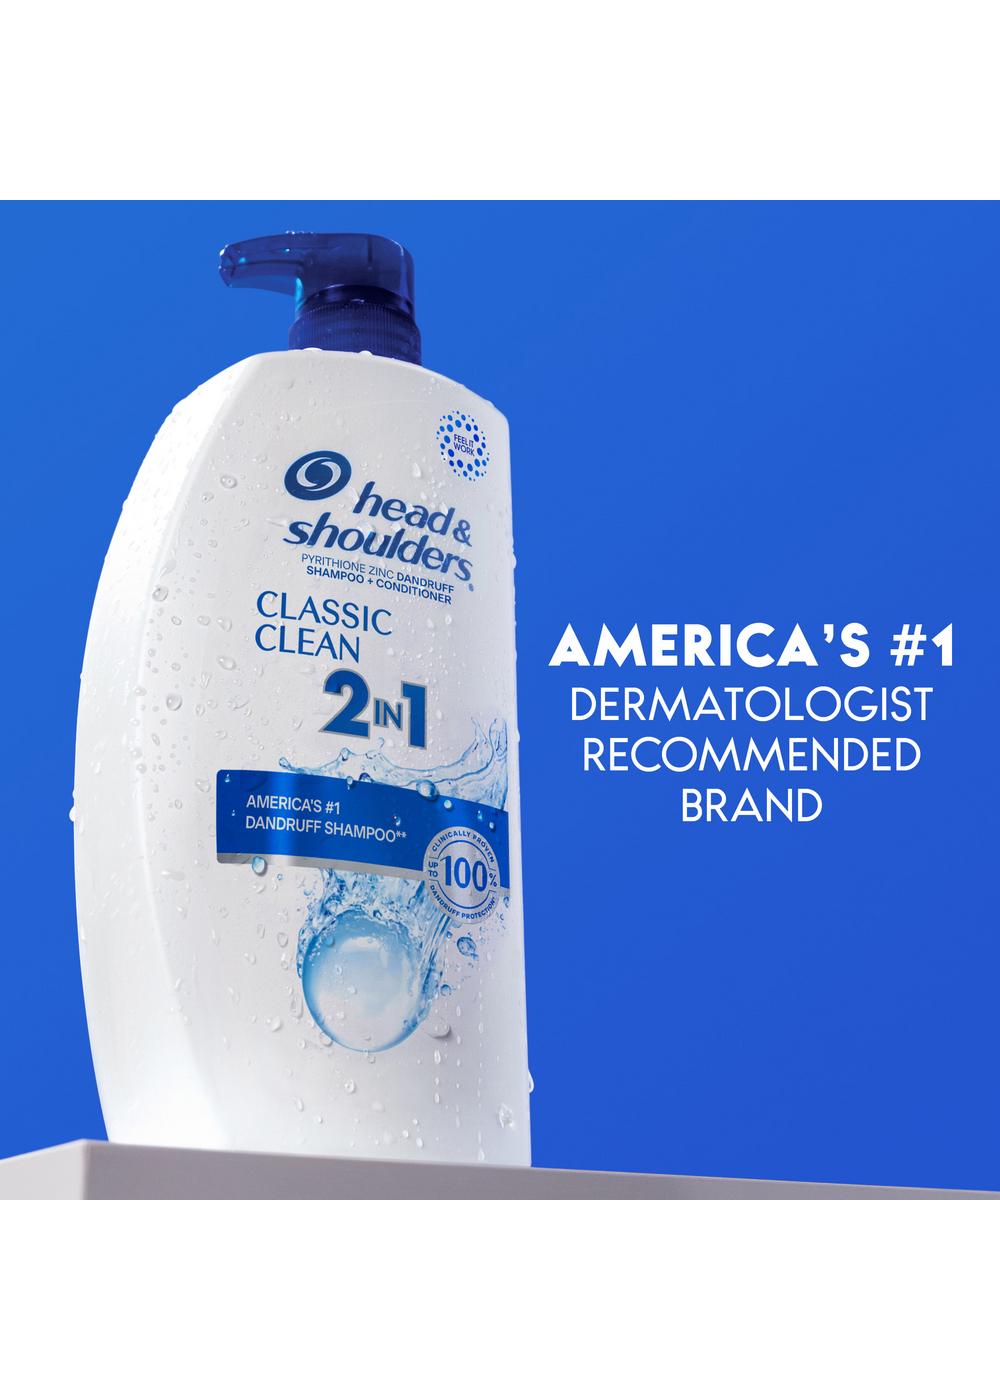 Head & Shoulders 2 in 1 Dandruff Shampoo + Conditioner - Classic Clean; image 9 of 11